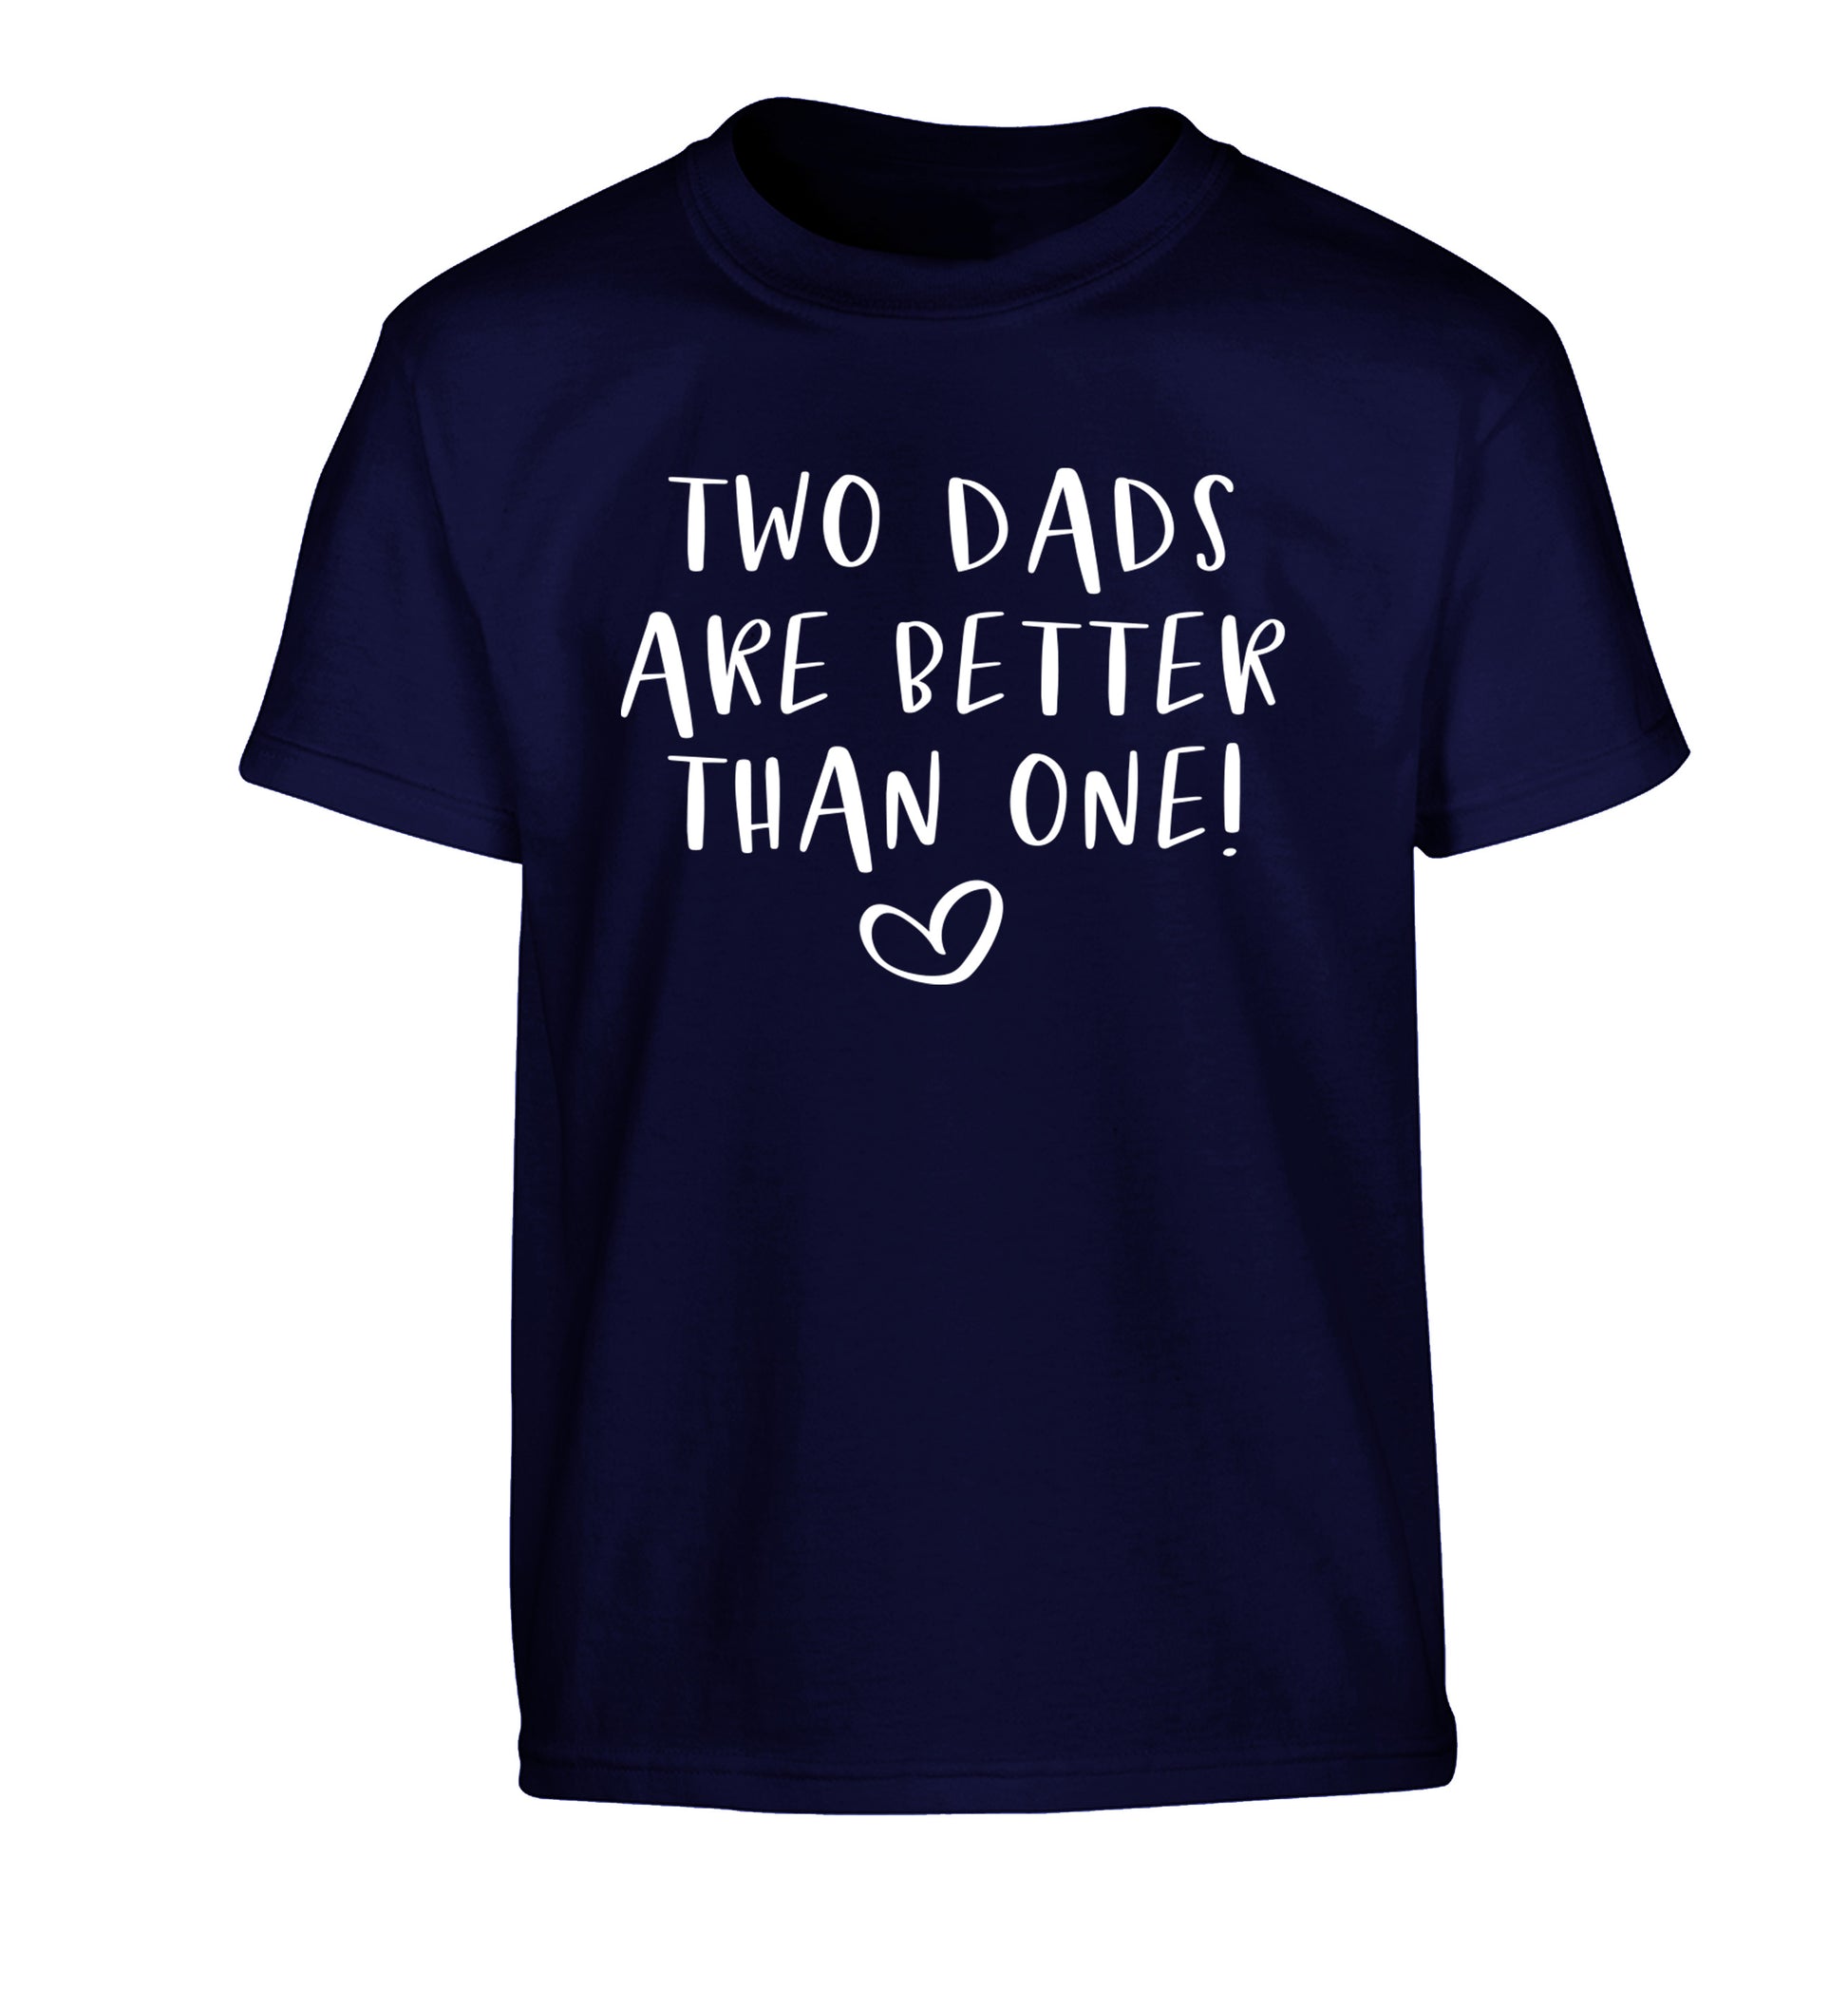 Two dads are better than one Children's navy Tshirt 12-13 Years